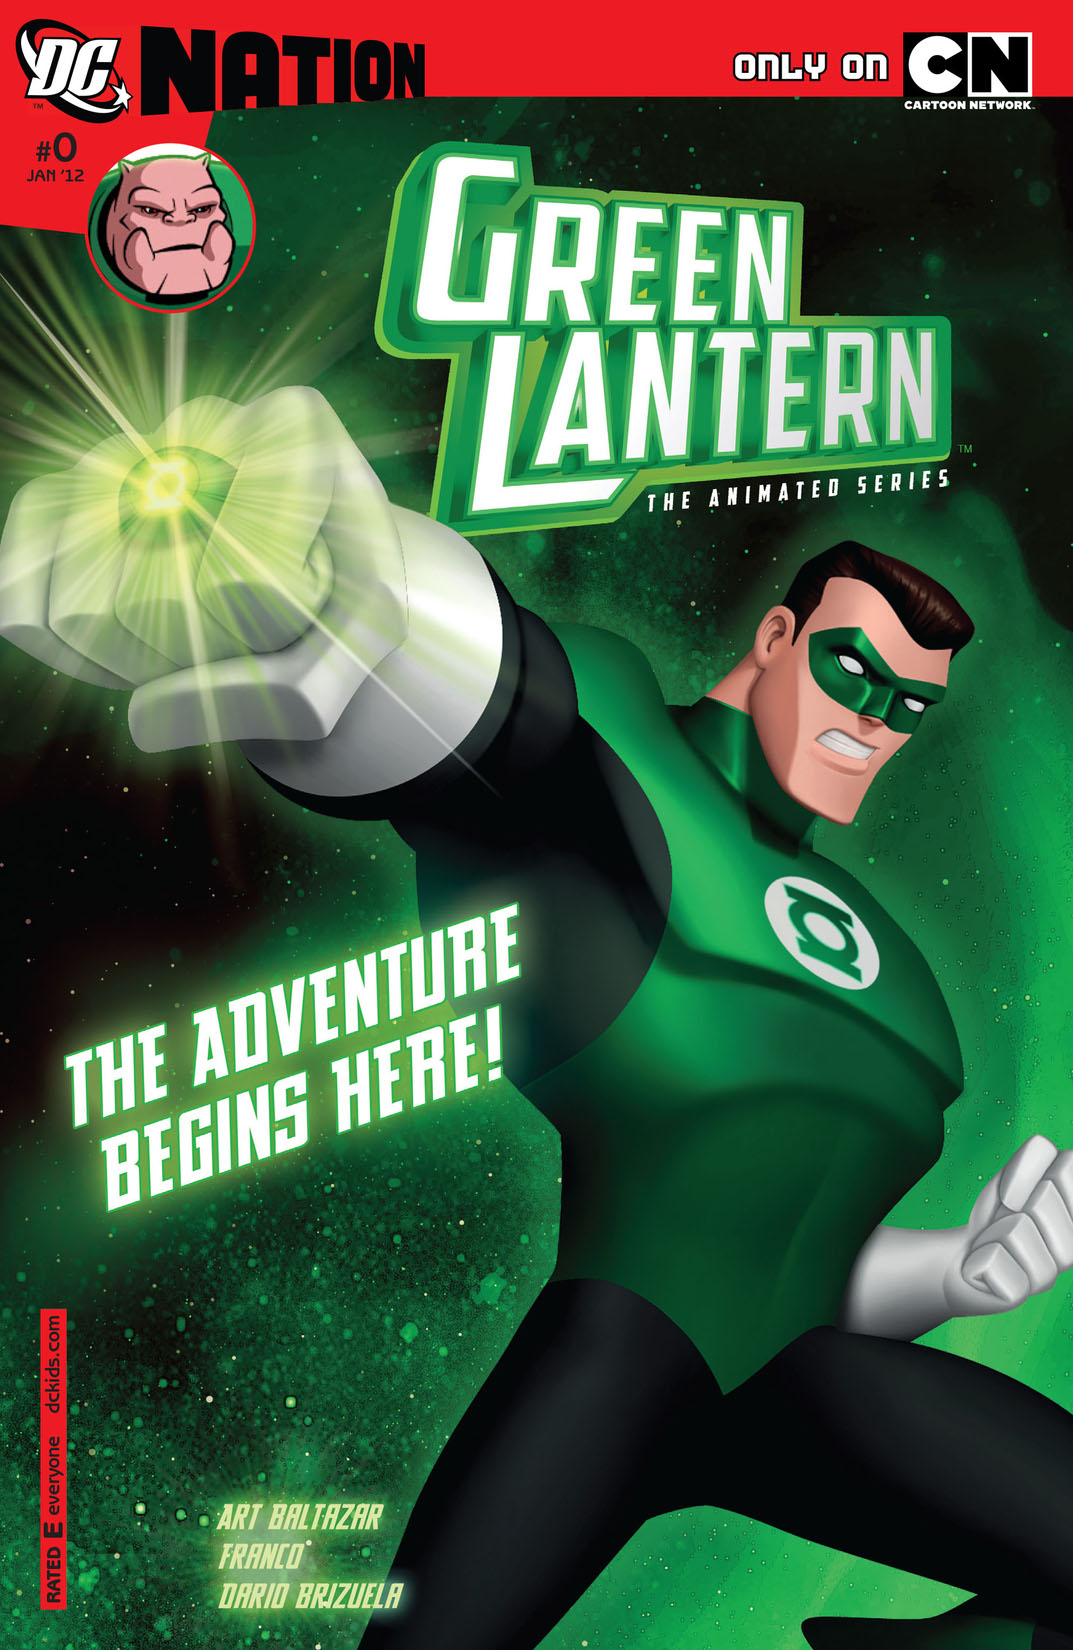 Green Lantern: The Animated Series #0 preview images